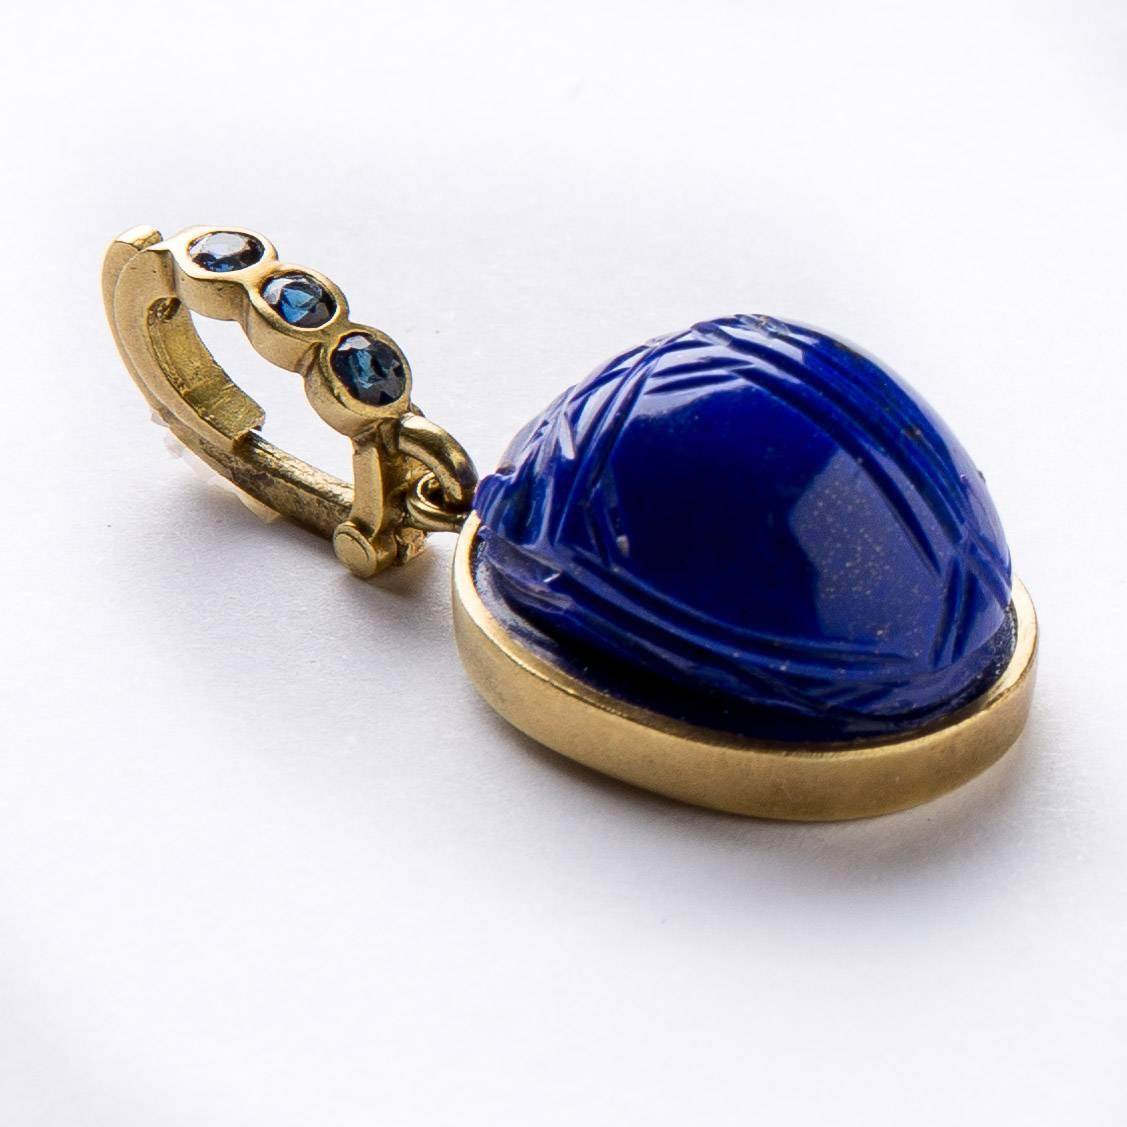 Lovely hand carved scarab pendant in natural lapis lazuli stone (by Master Idar-Oberstein carver). Pendant is set in 18 karat yellow brushed gold frame with gold detachable enhancer with deep blue sapphires (.30cts).